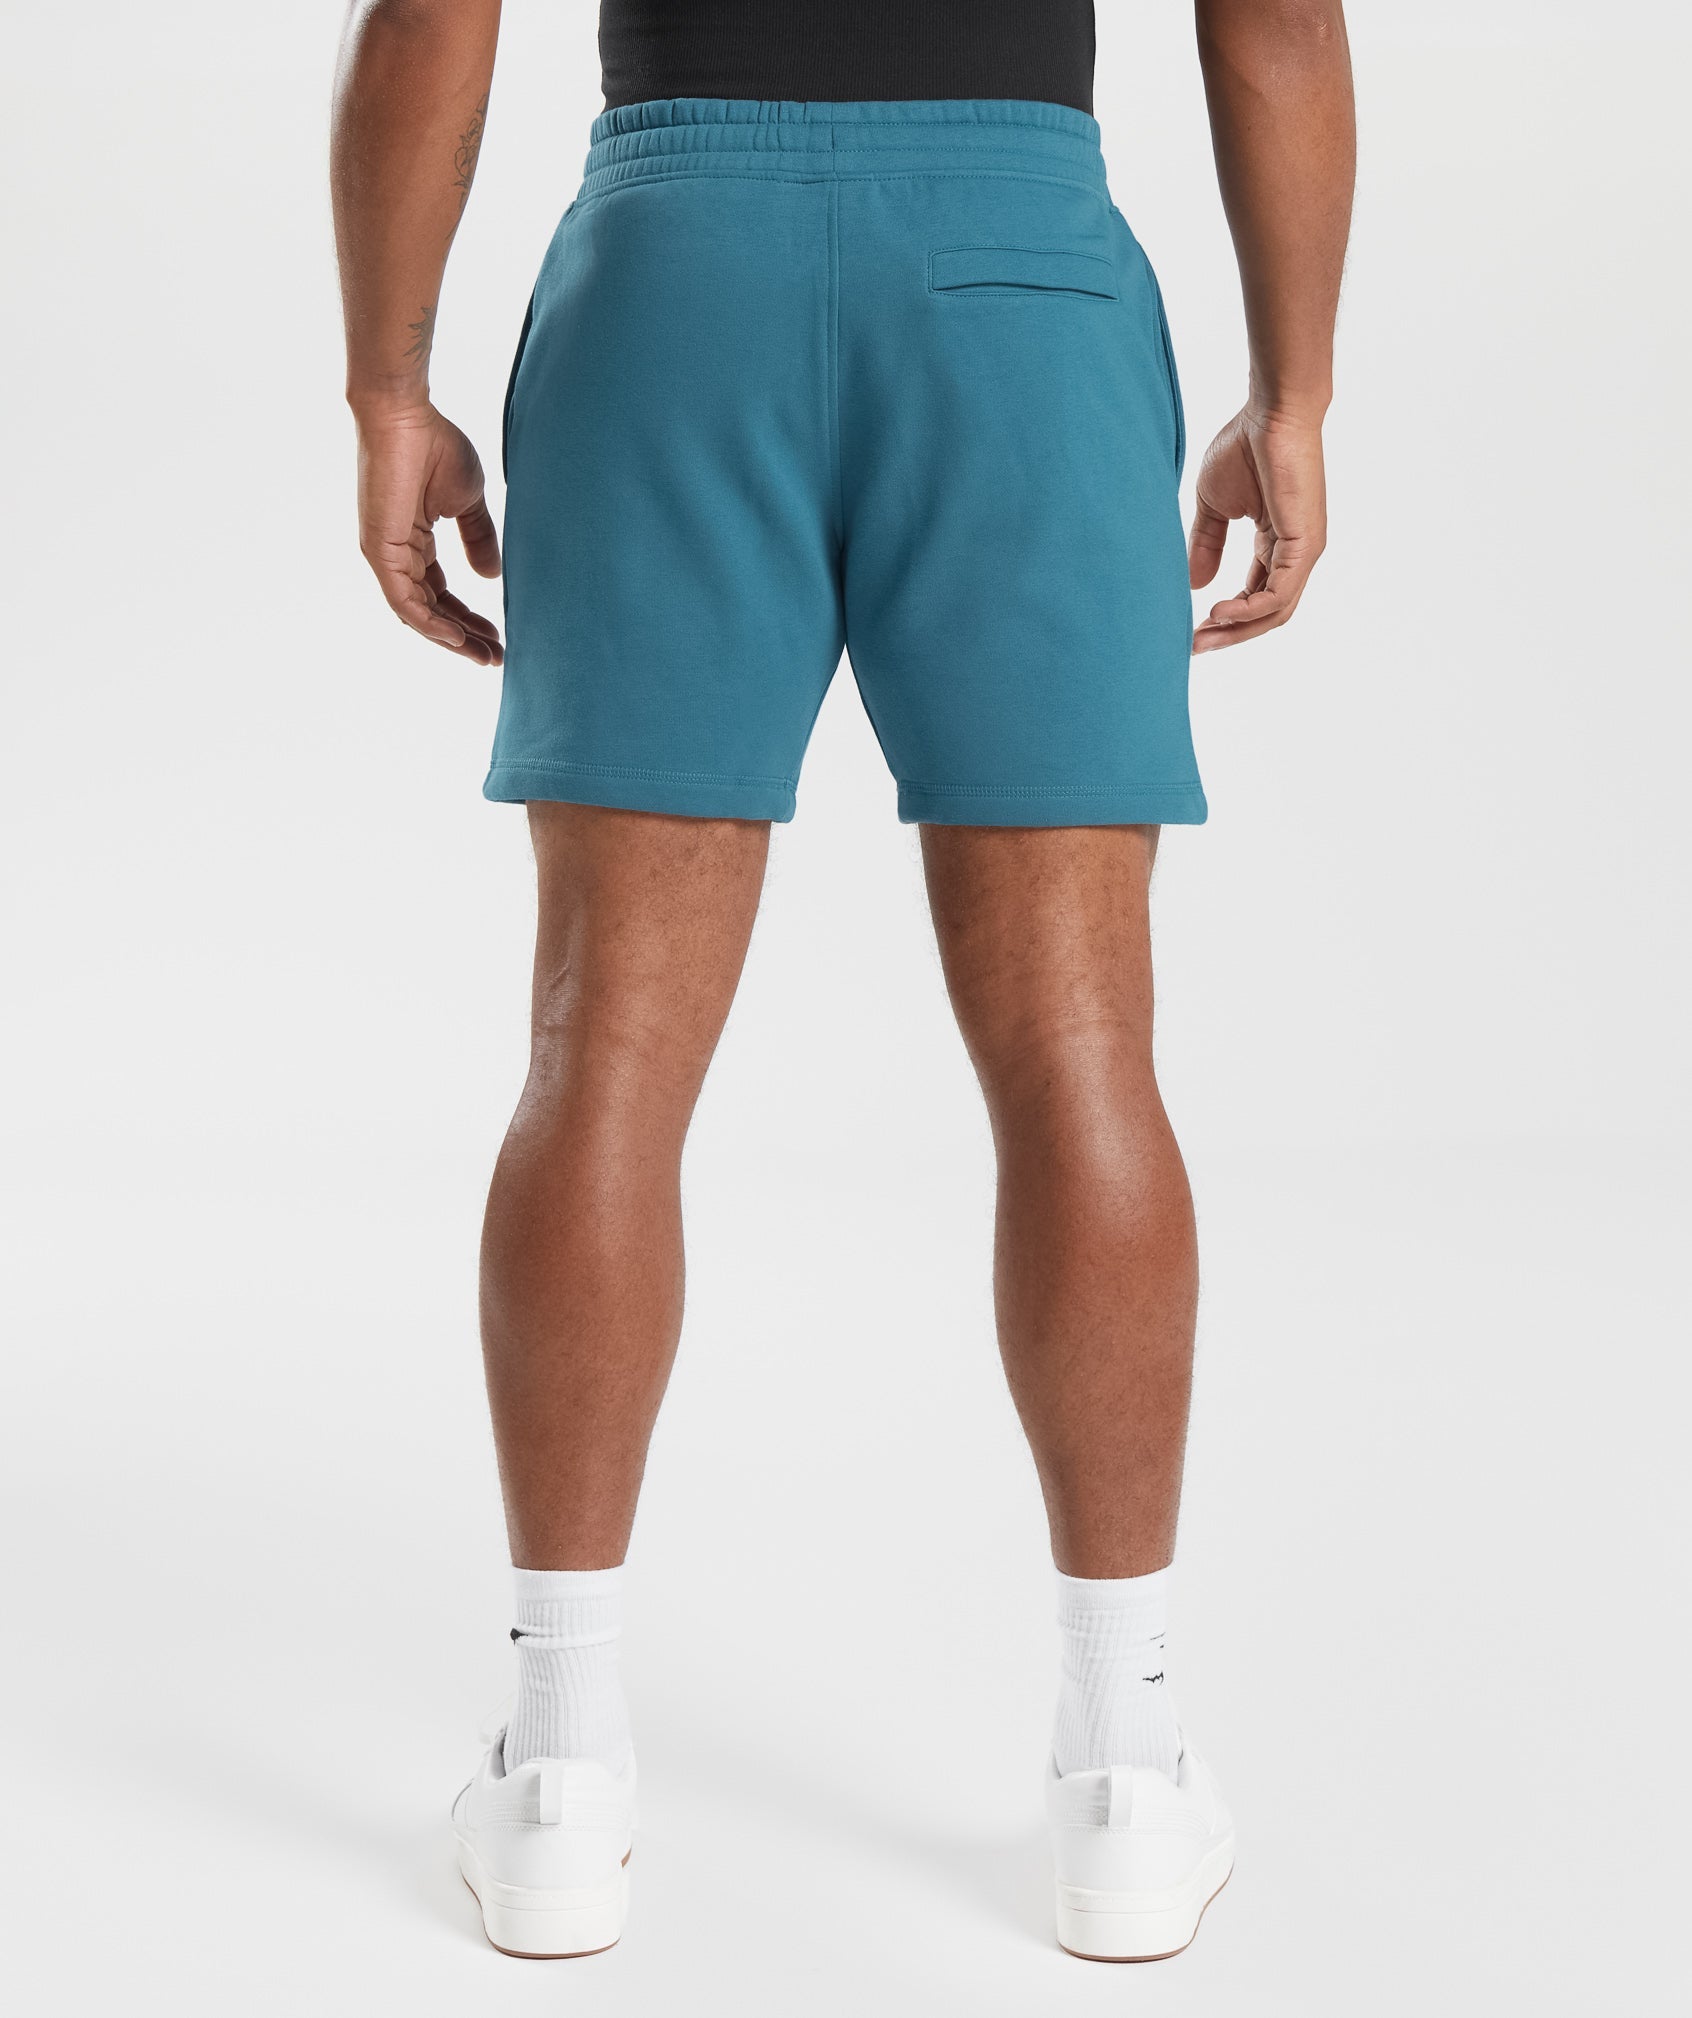 Crest 7" Shorts in Terrace Blue - view 2